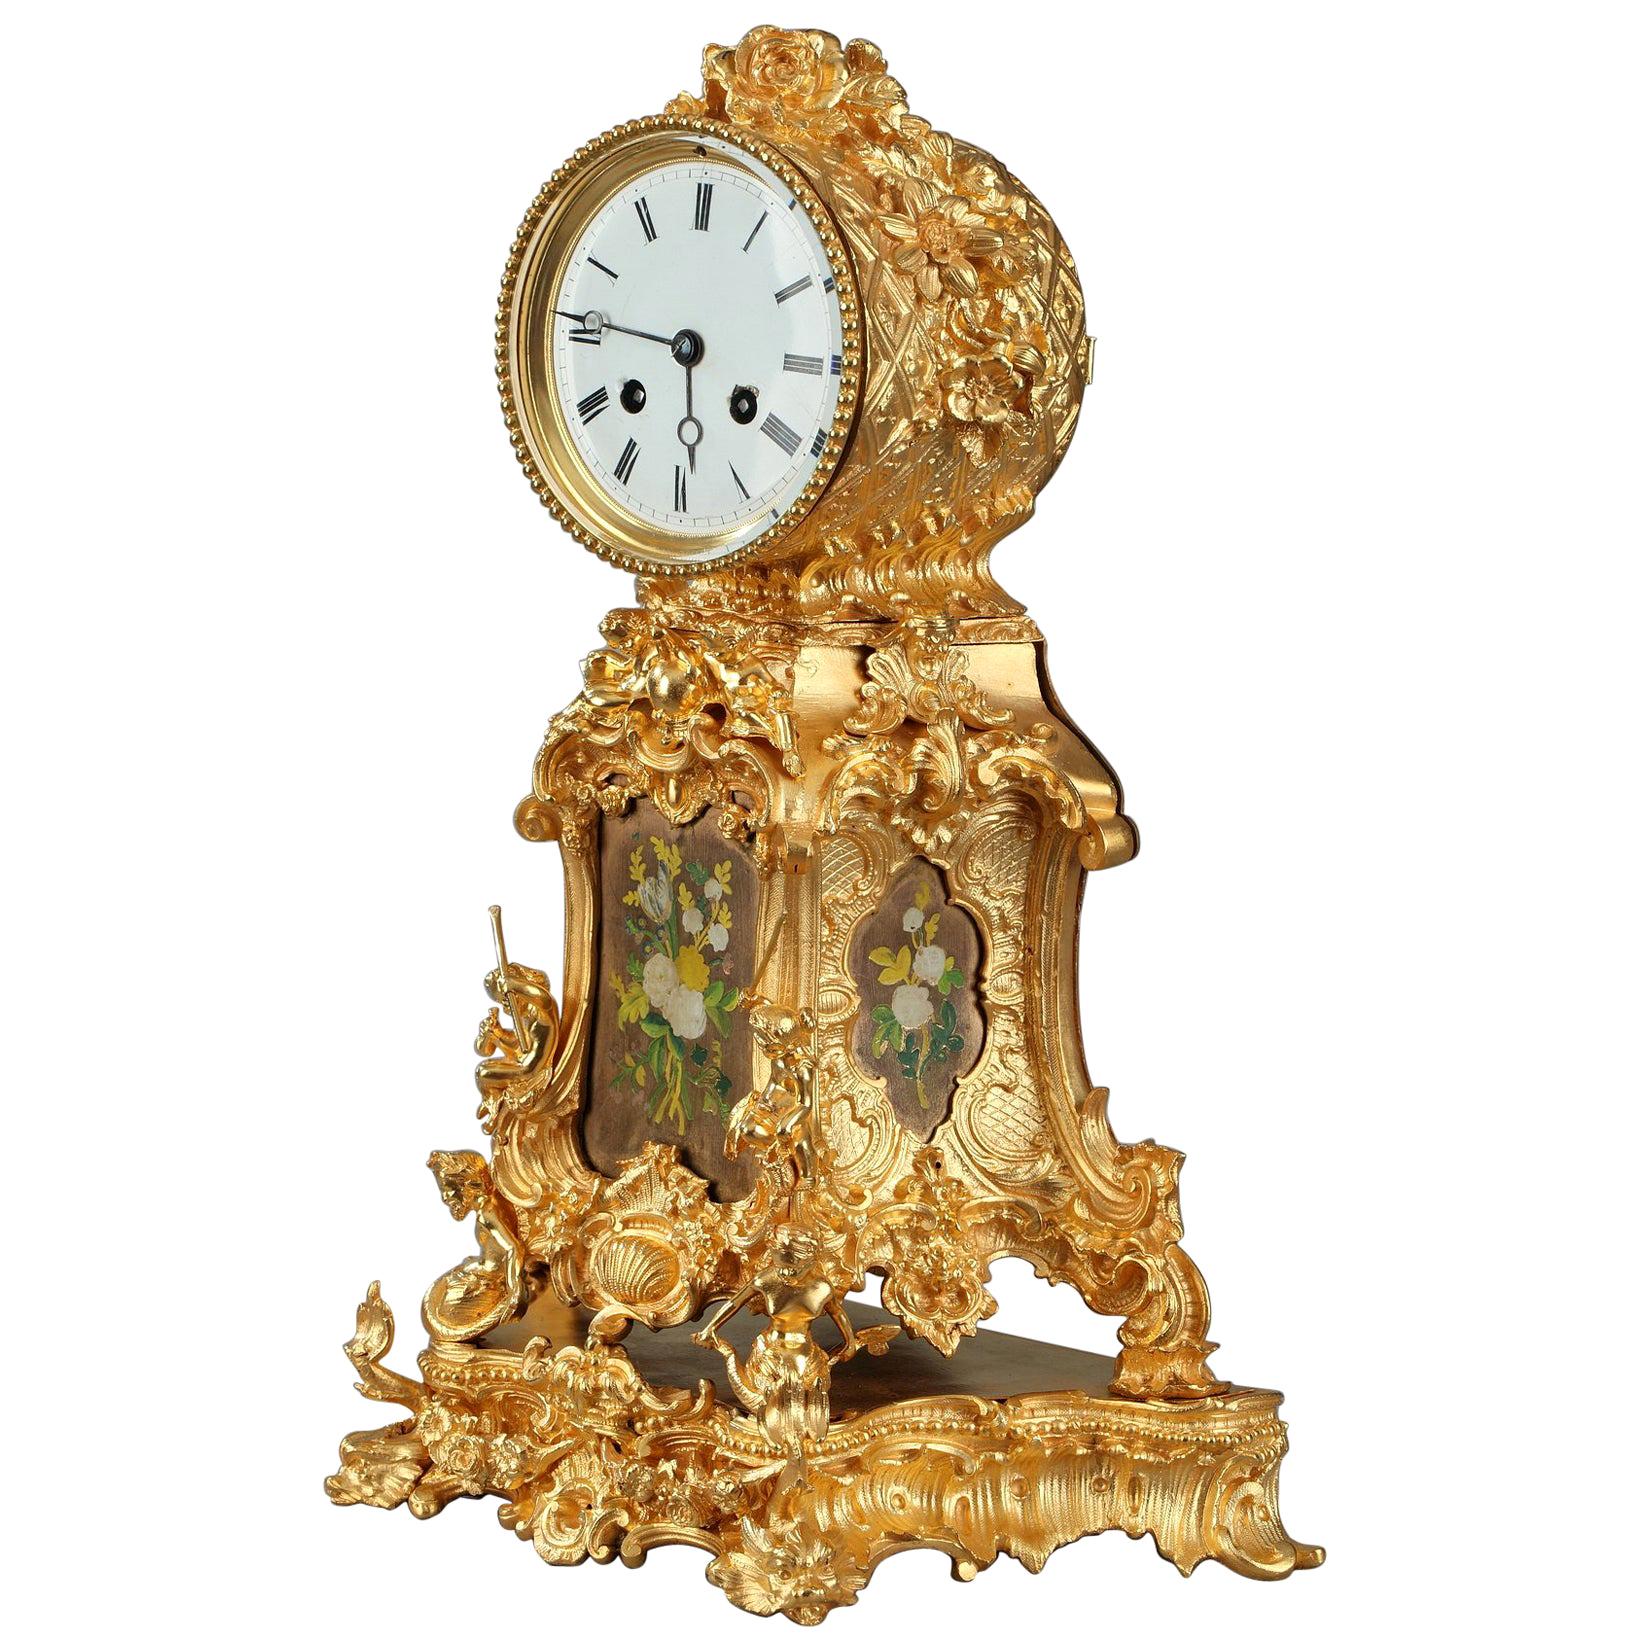 Late 19th Century Rocaille Ormolu Mantel Clock with Floral Decoration